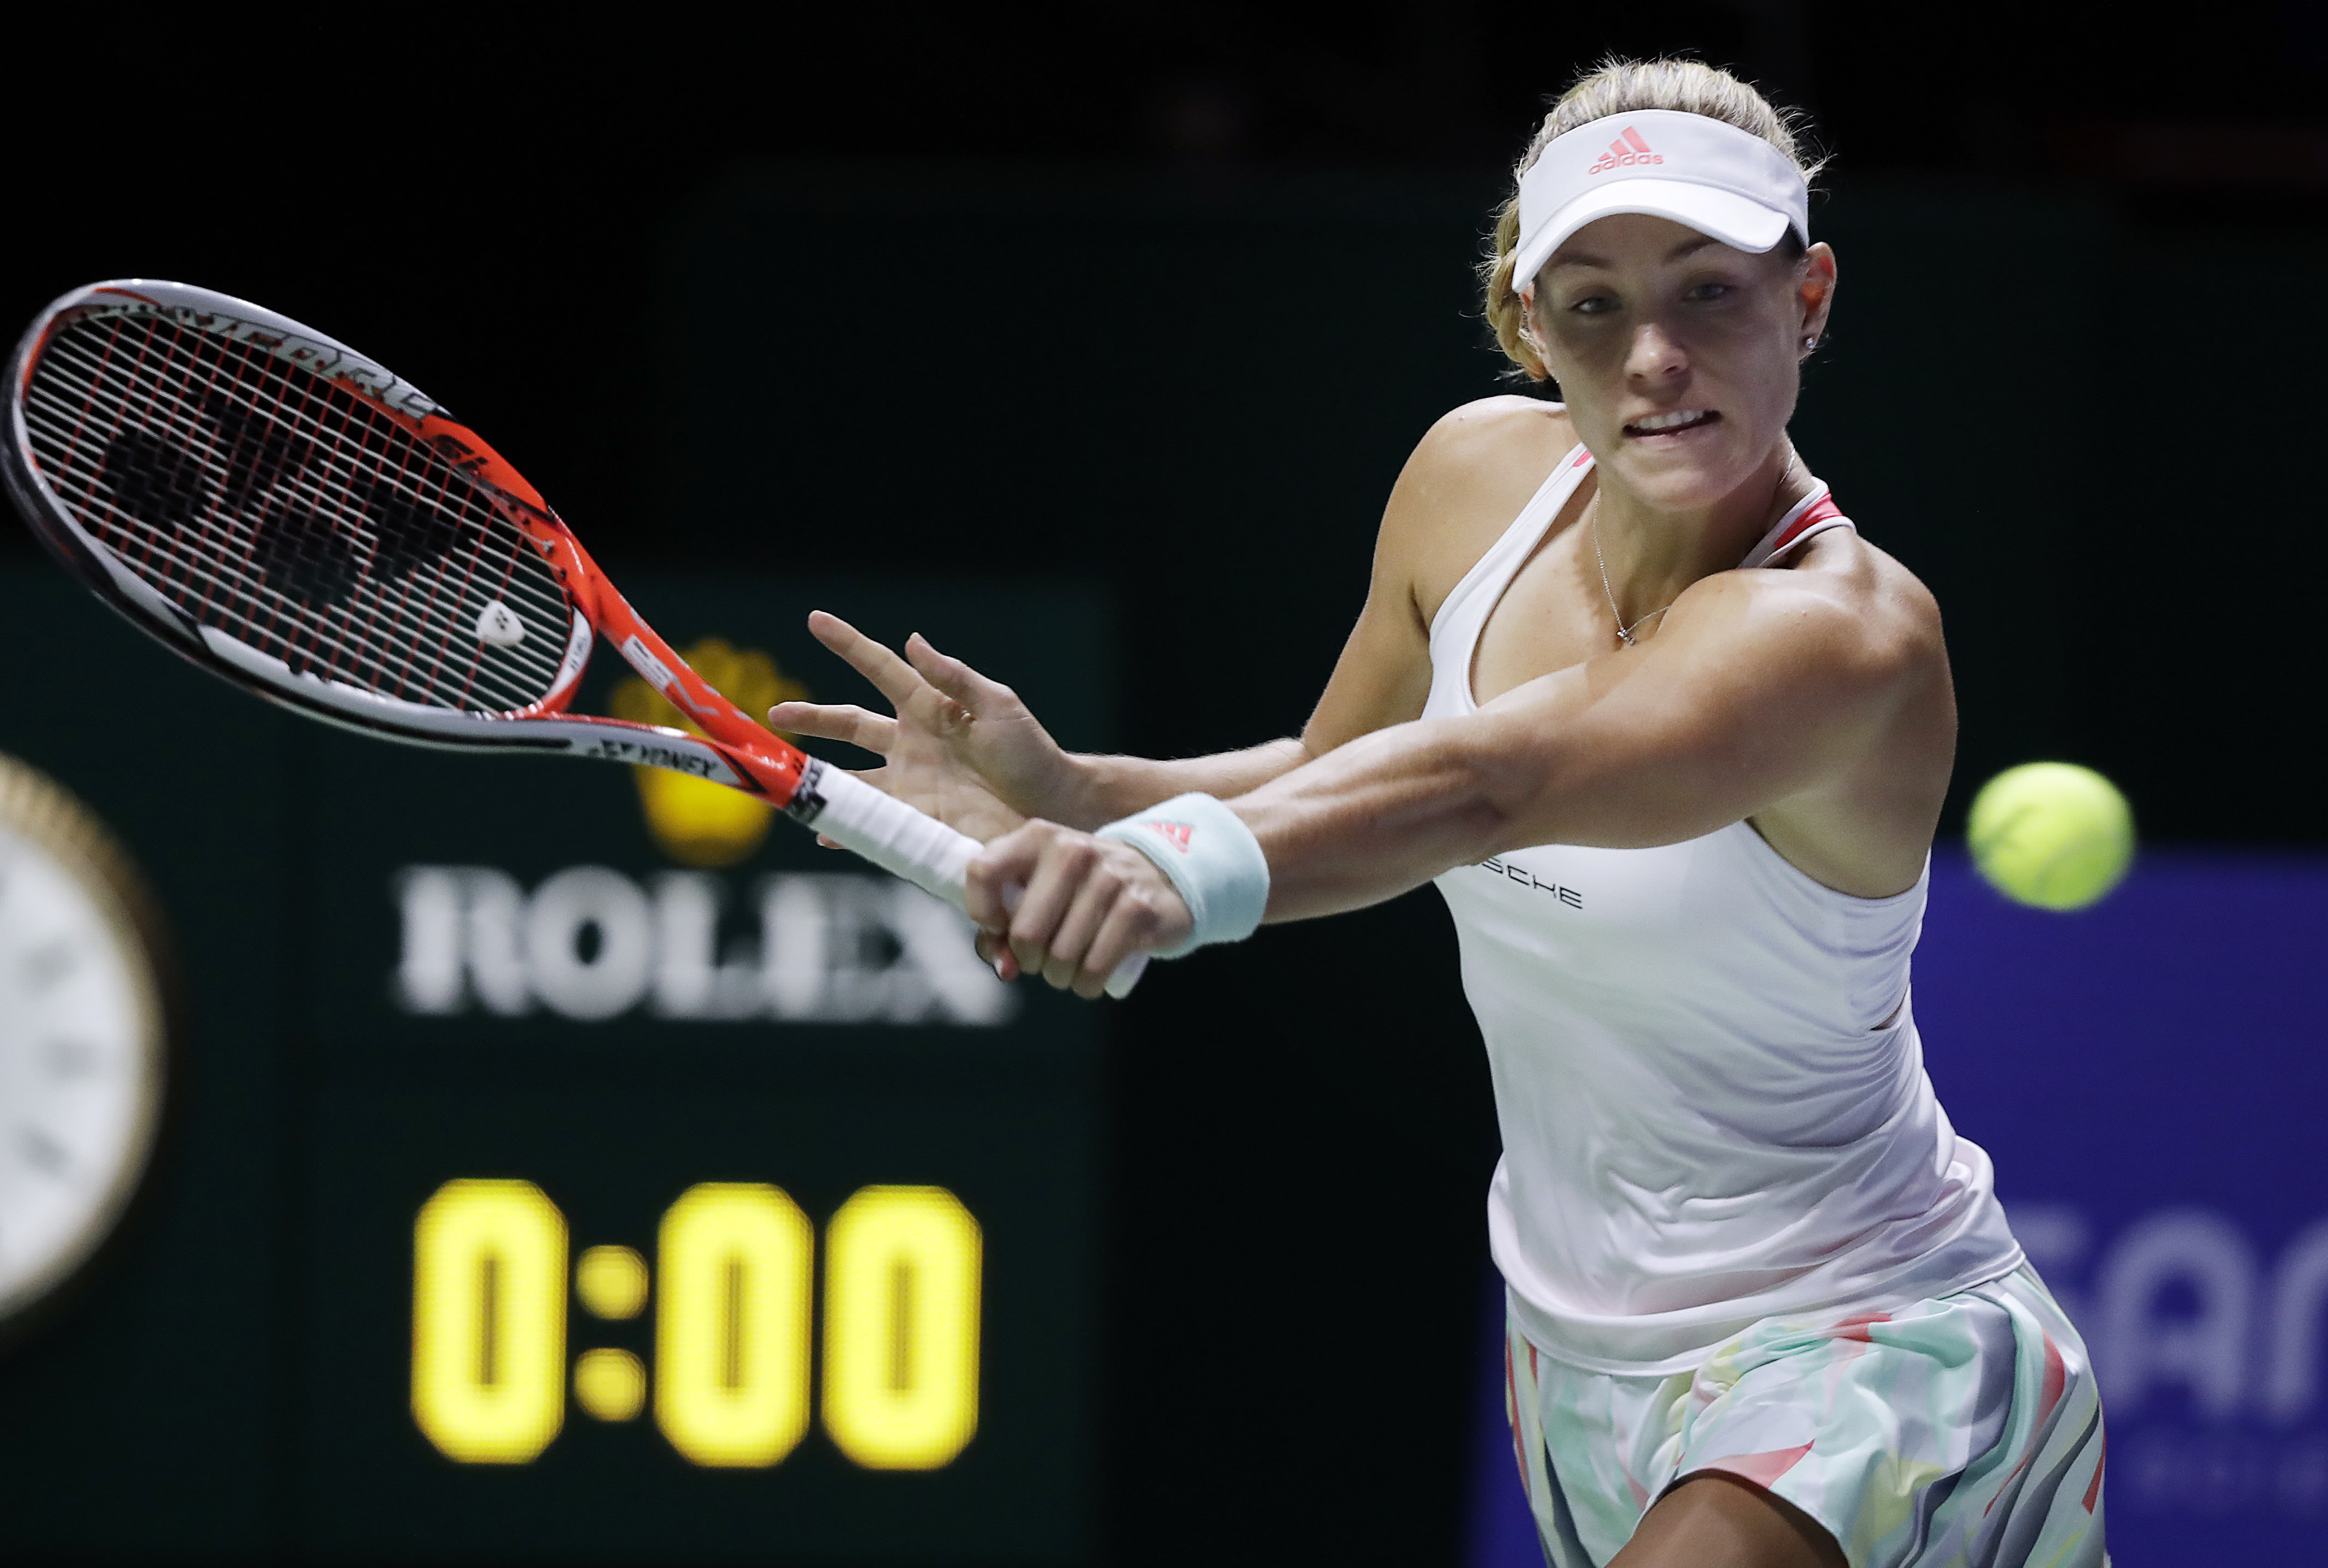 The last two standing Previewing, picking the WTA Finals title match